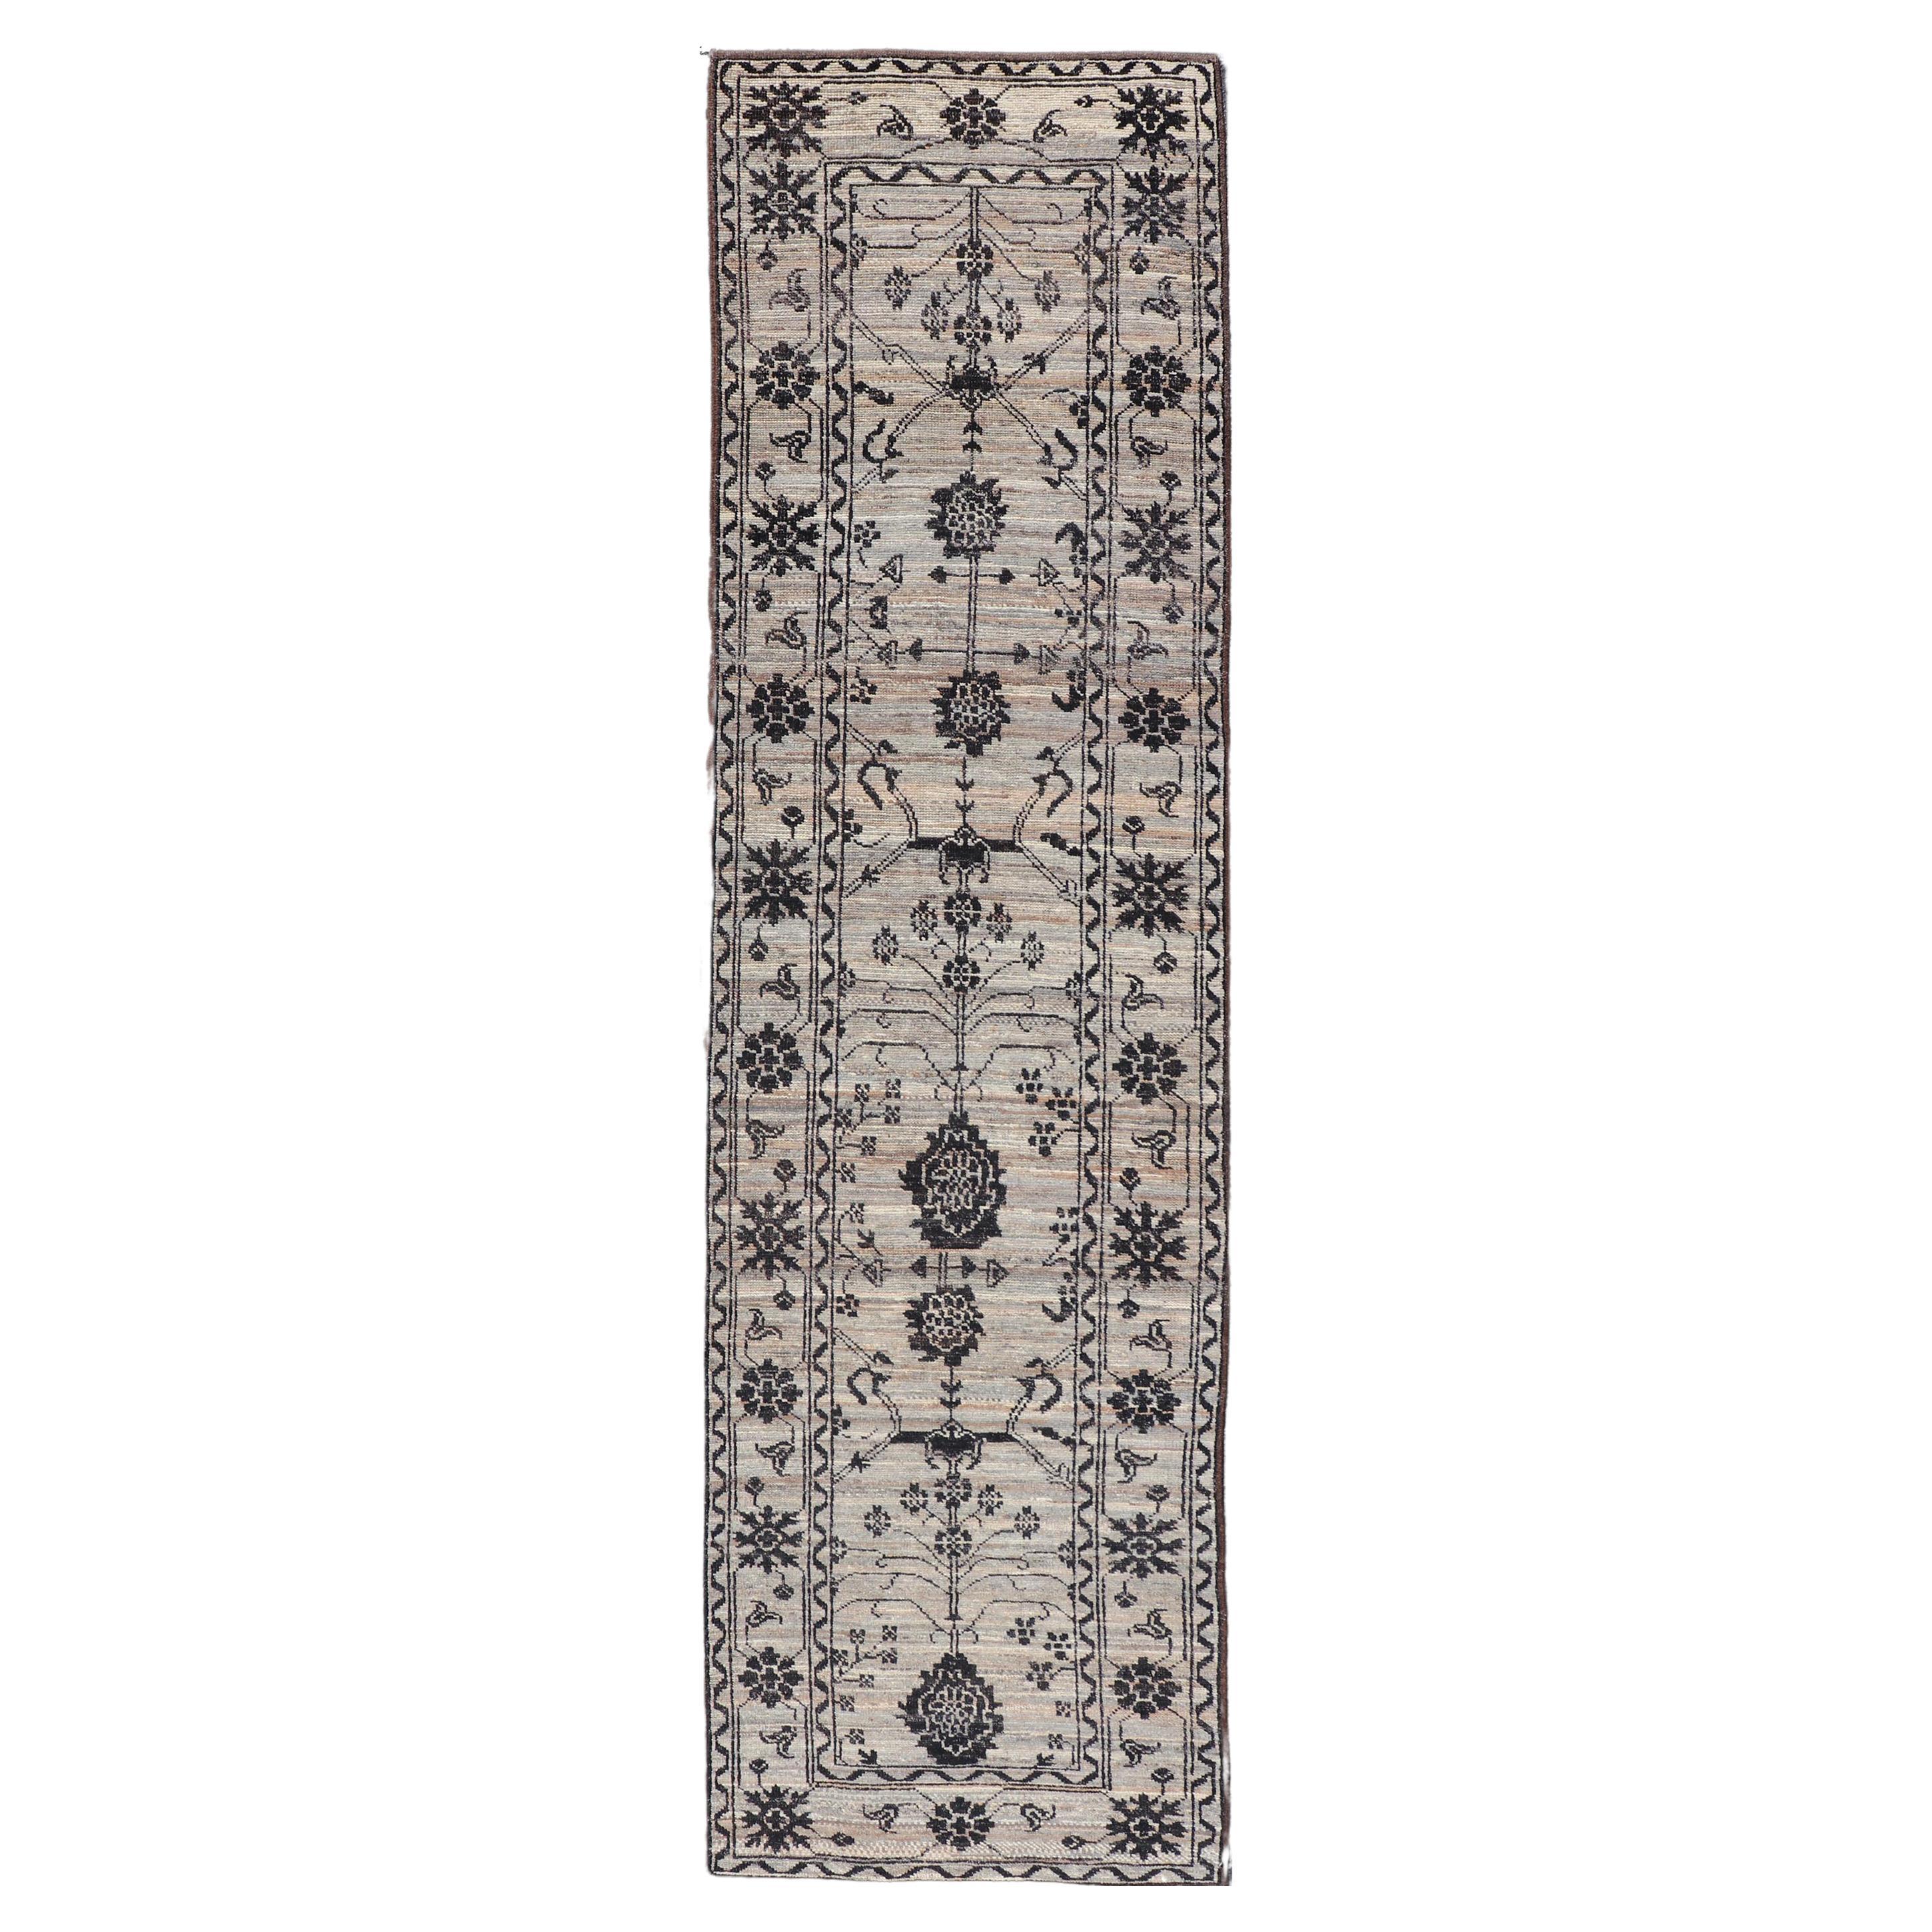 Modern Hand-Knotted Rug in Wool with Sub-Geometric Oushak Design in Earthy Tones